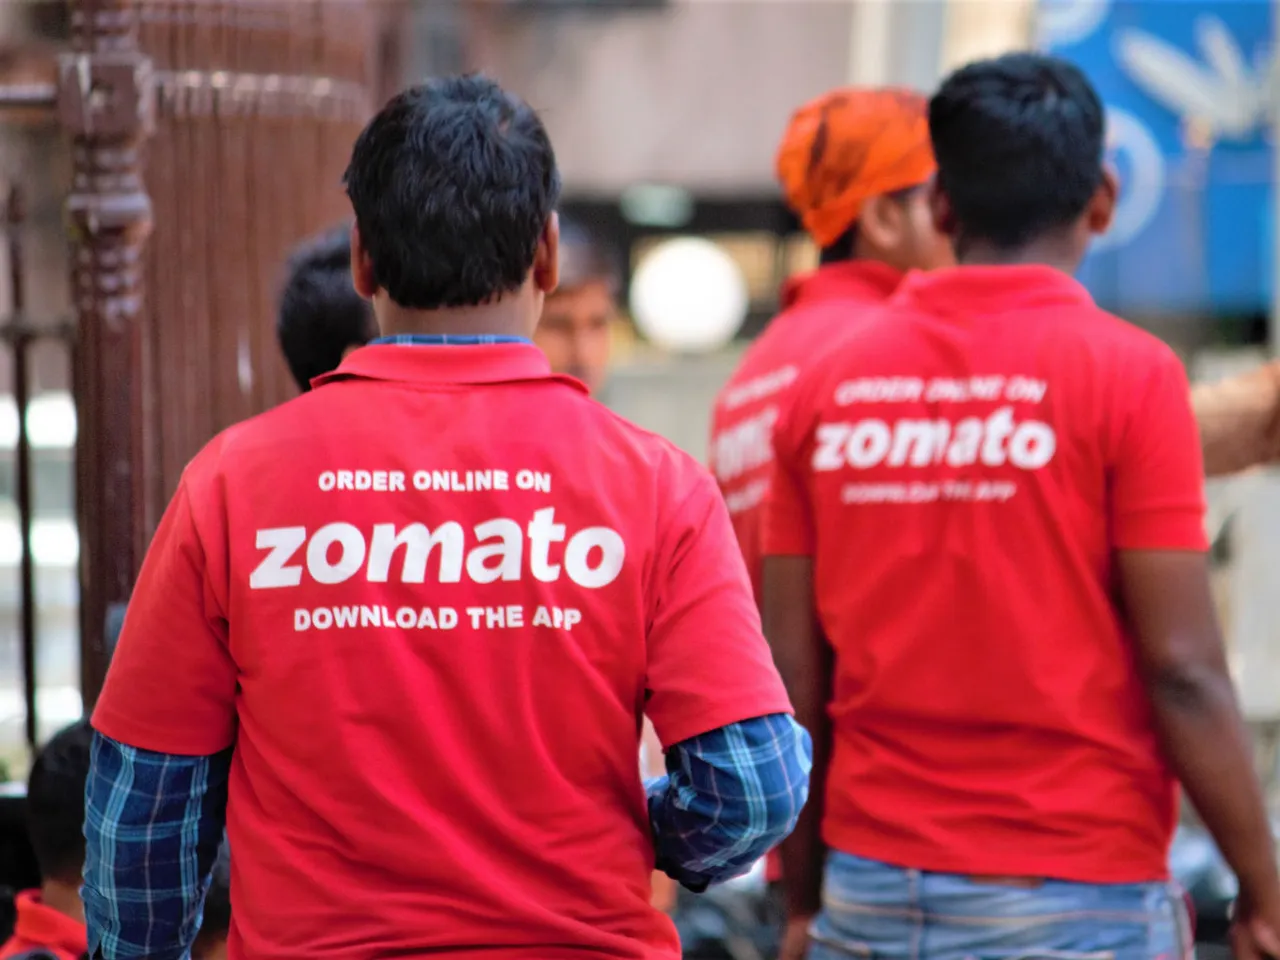 Zomato All Set For 2021 IPO, Appoints Legal Advisors